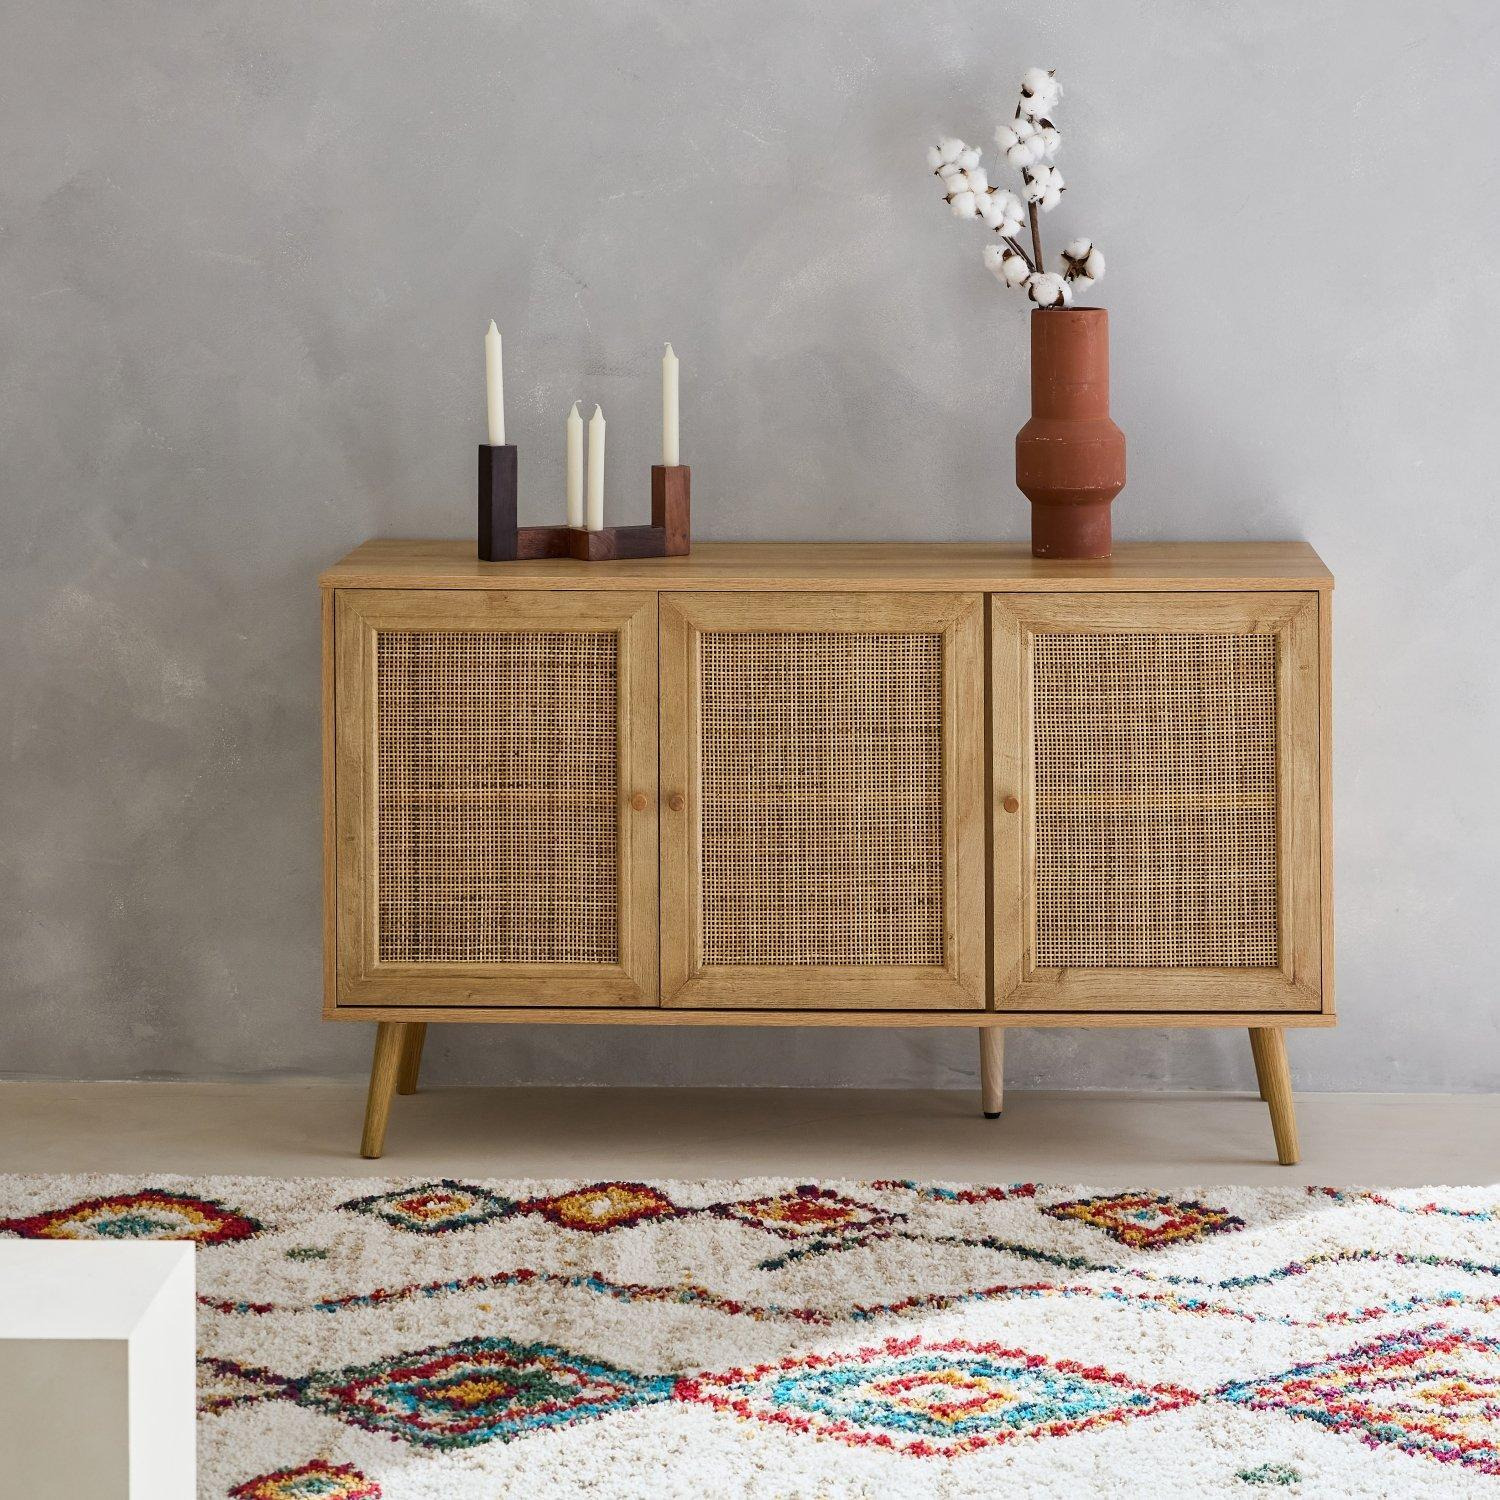 3-door Wood And Cane Rattan Sideboard Cabinet - image 1